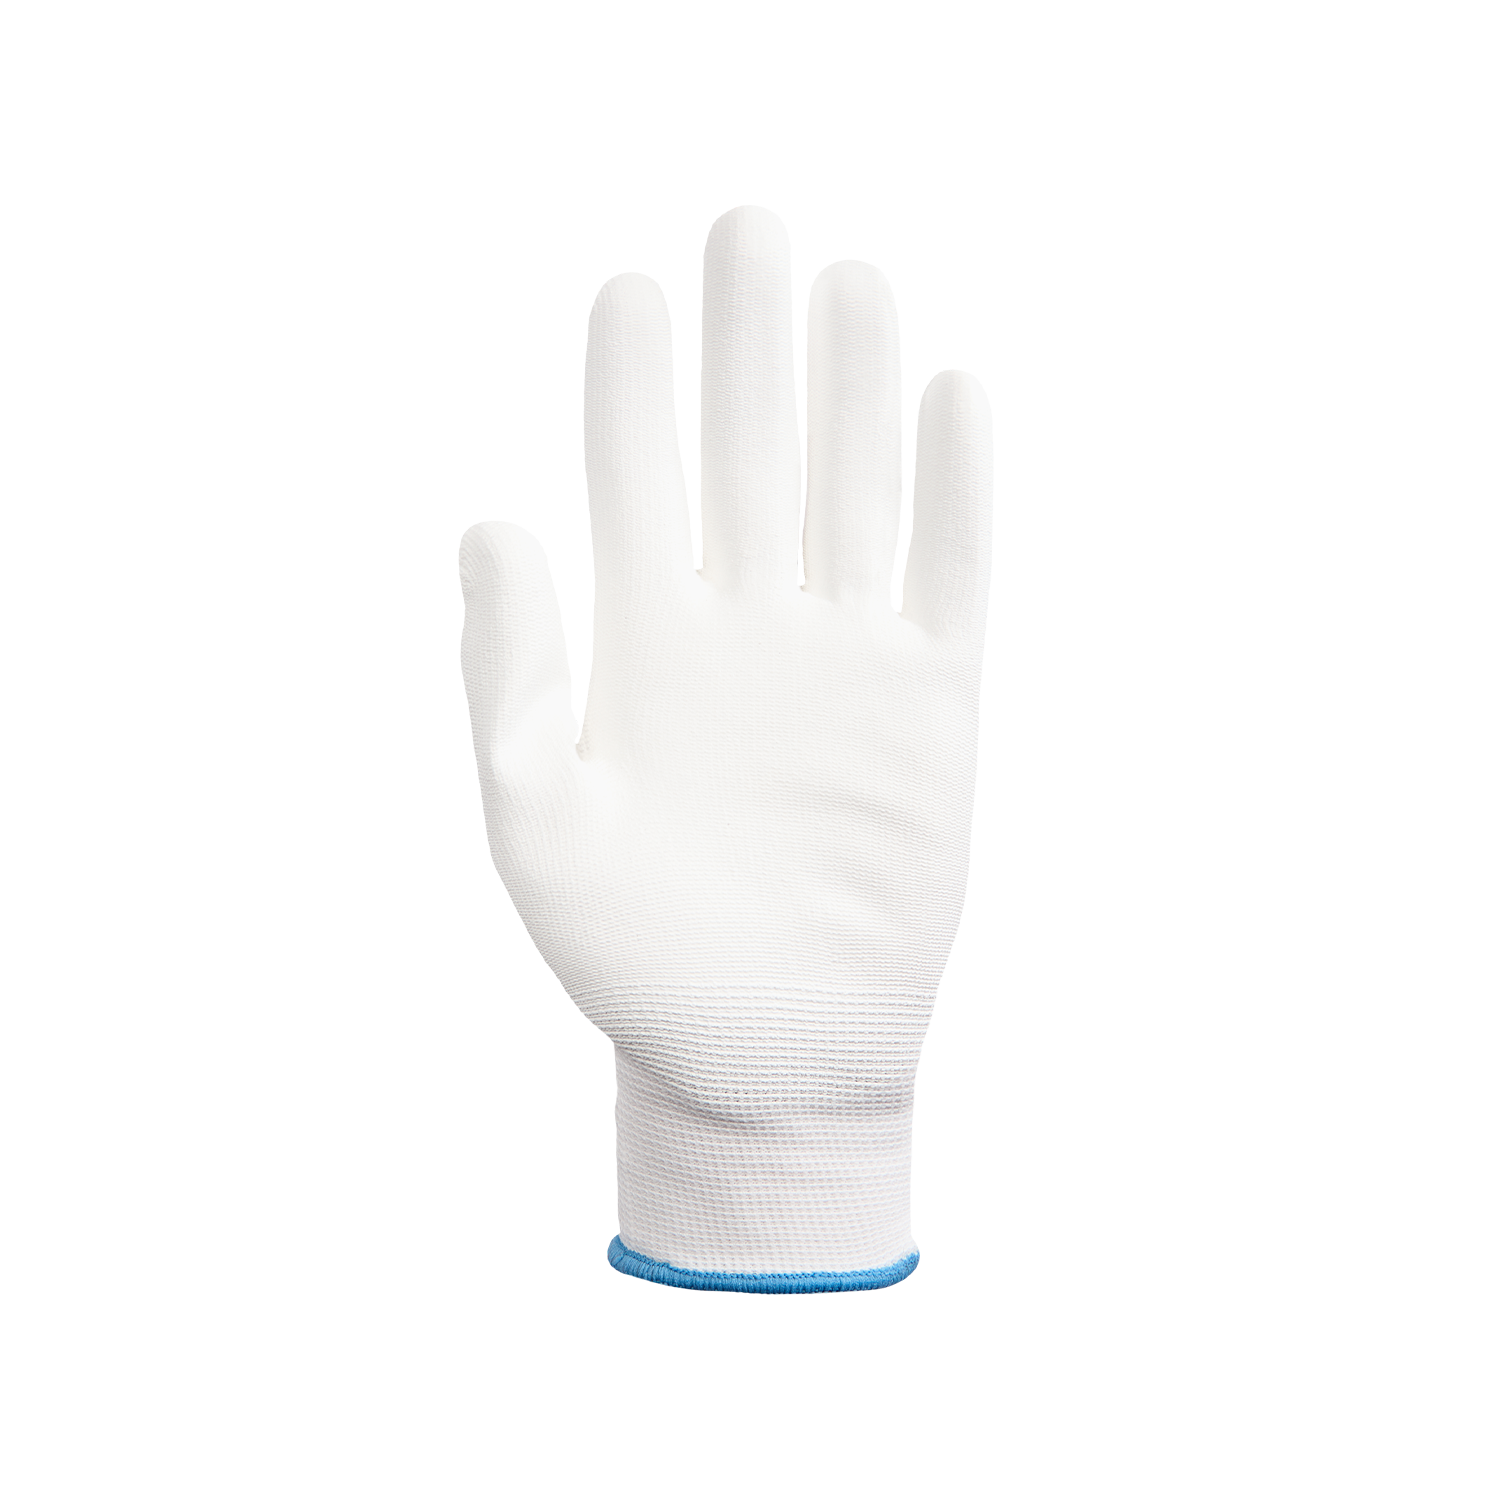 NORSE PU White assembly gloves size 8